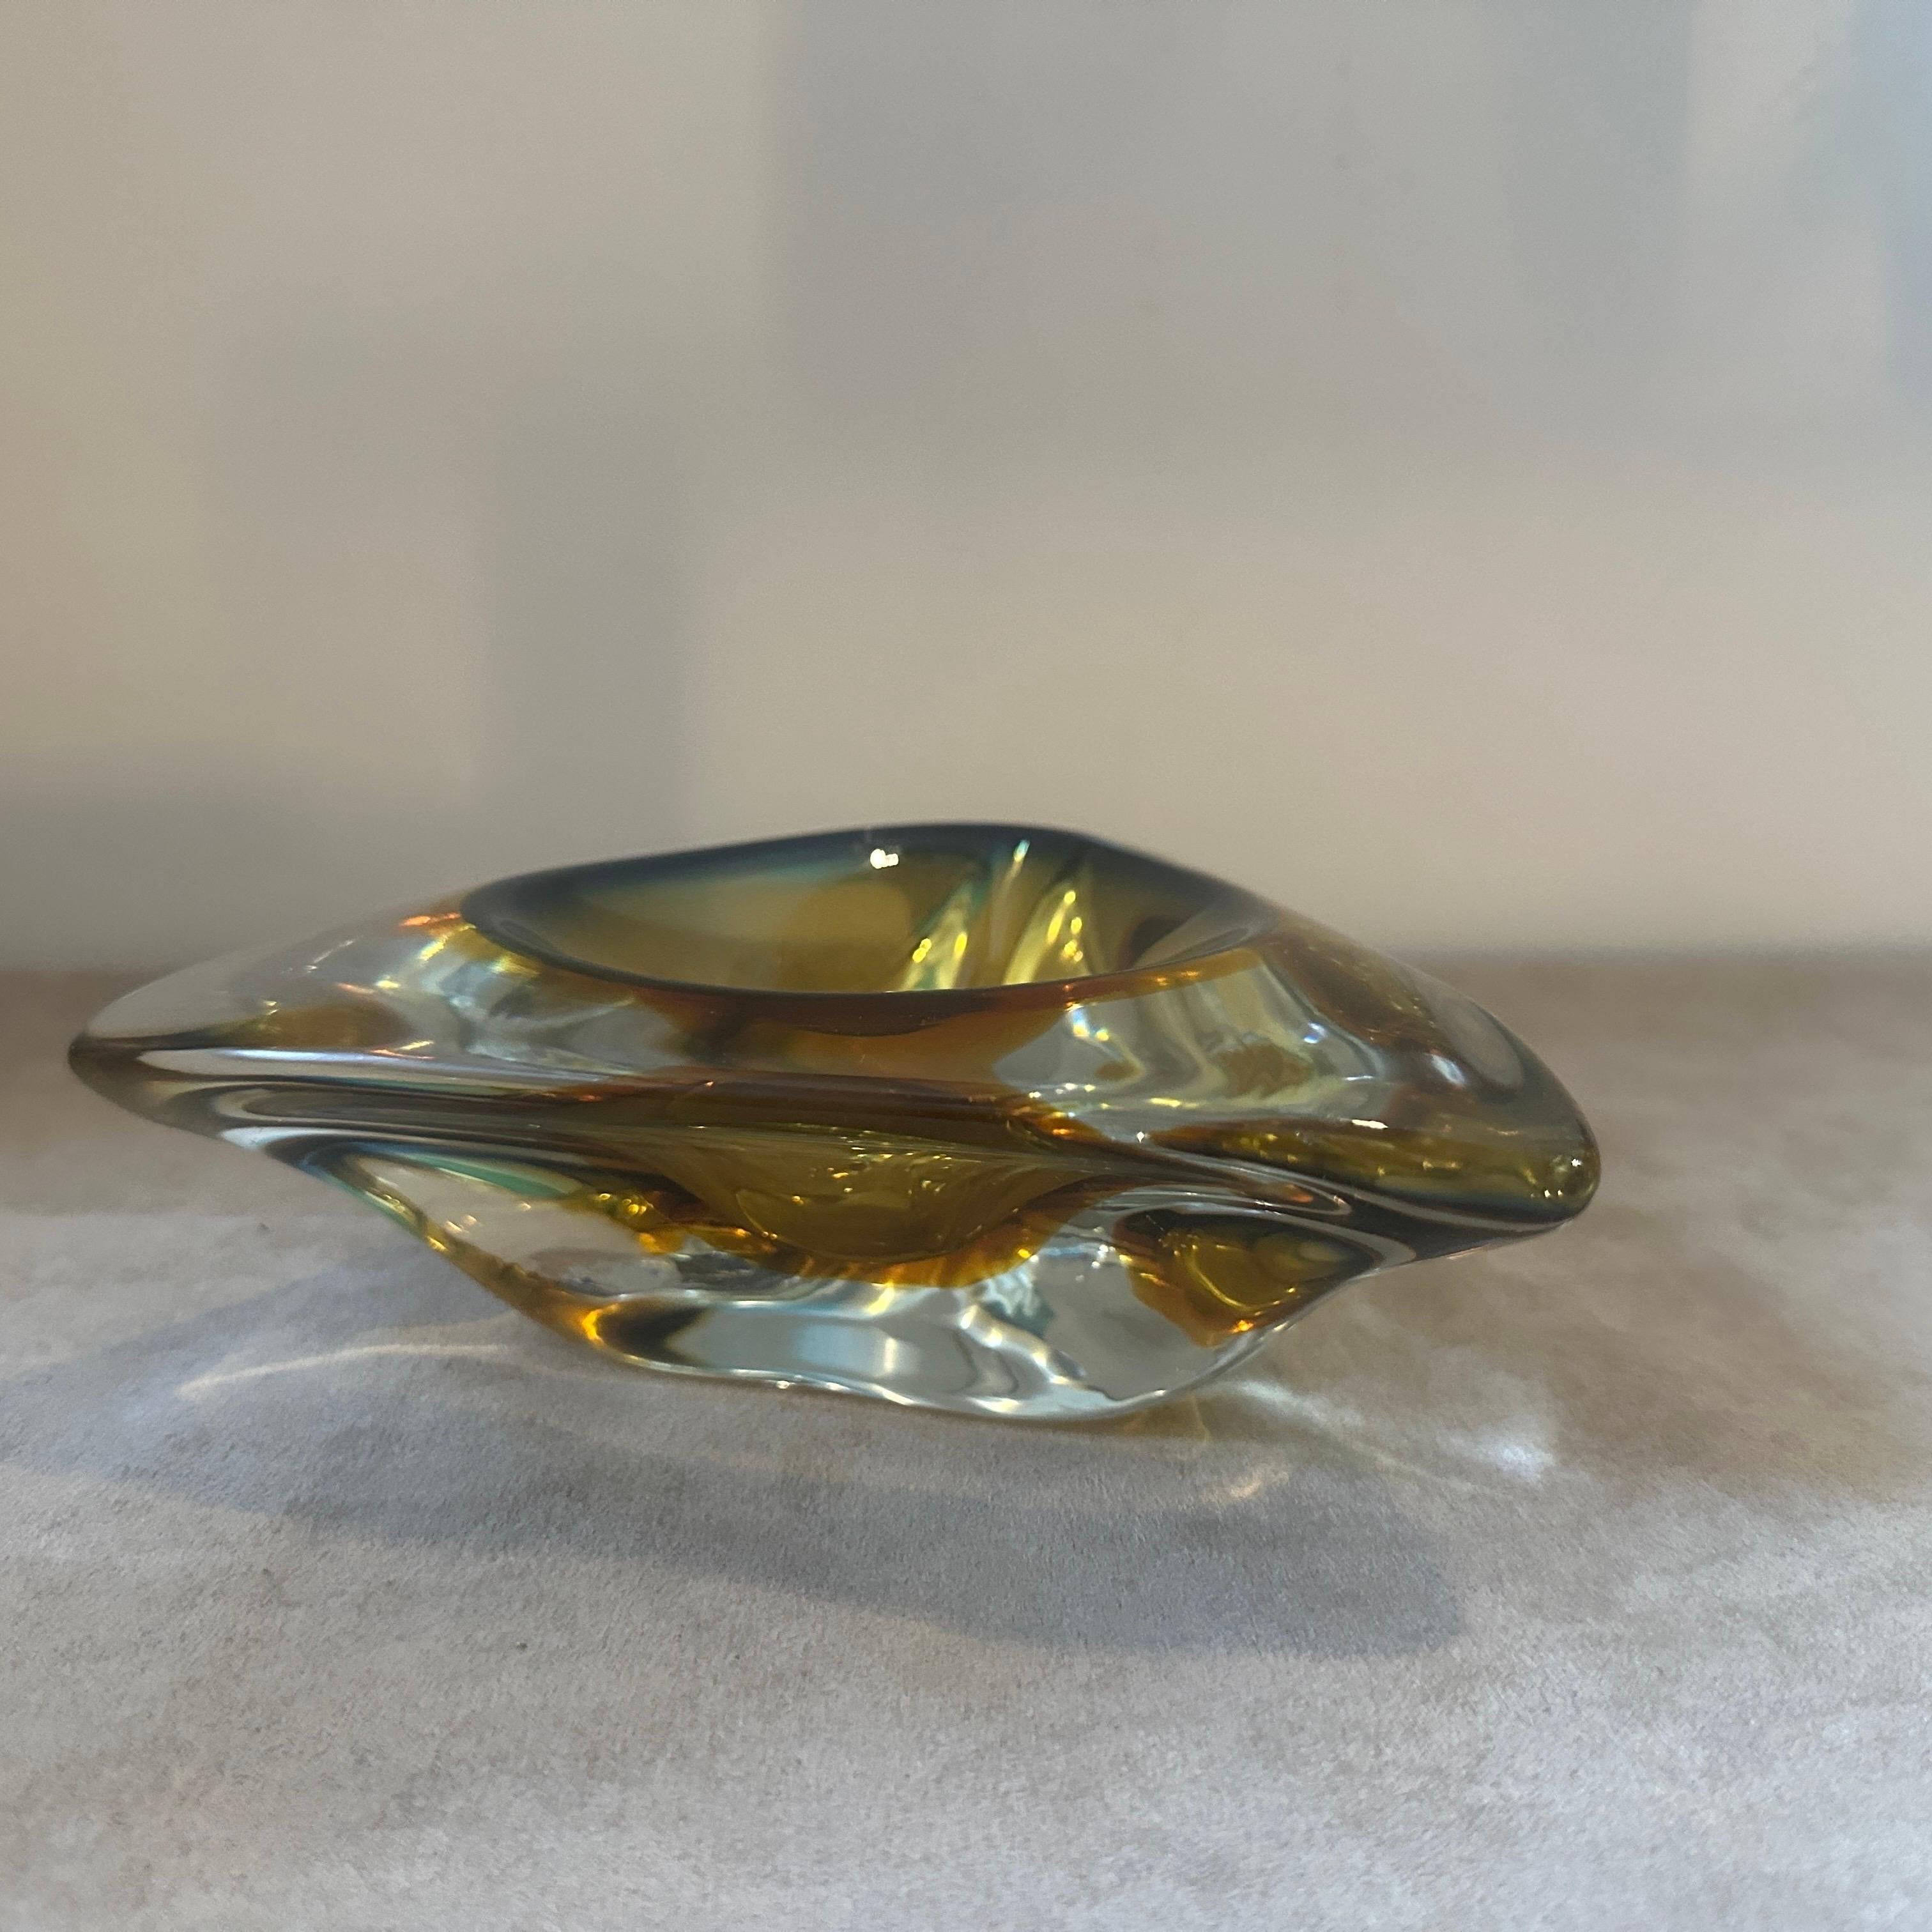 Italian A 1960s Modernist Yellow Green Sommerso Murano Glass Ashtray by Seguso For Sale